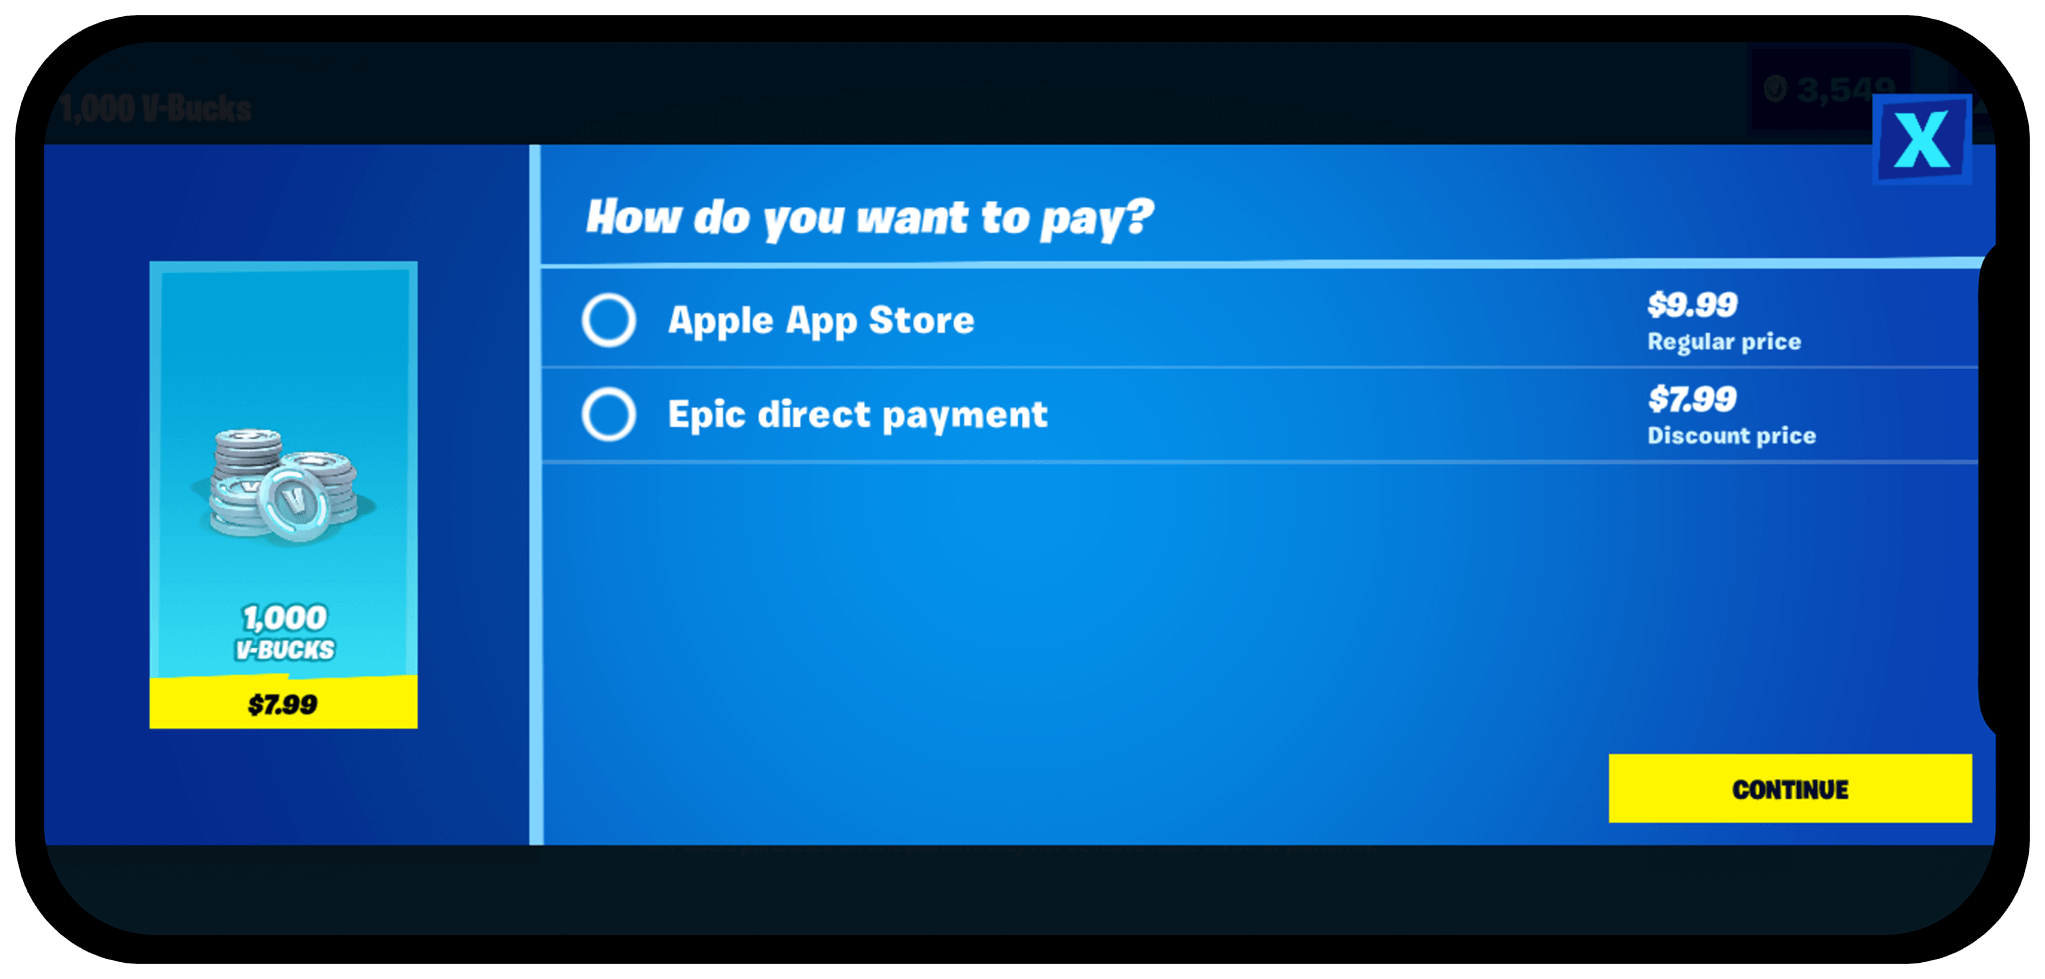 epic-direct-pay-apple-app-store-2045x979-730033169.png